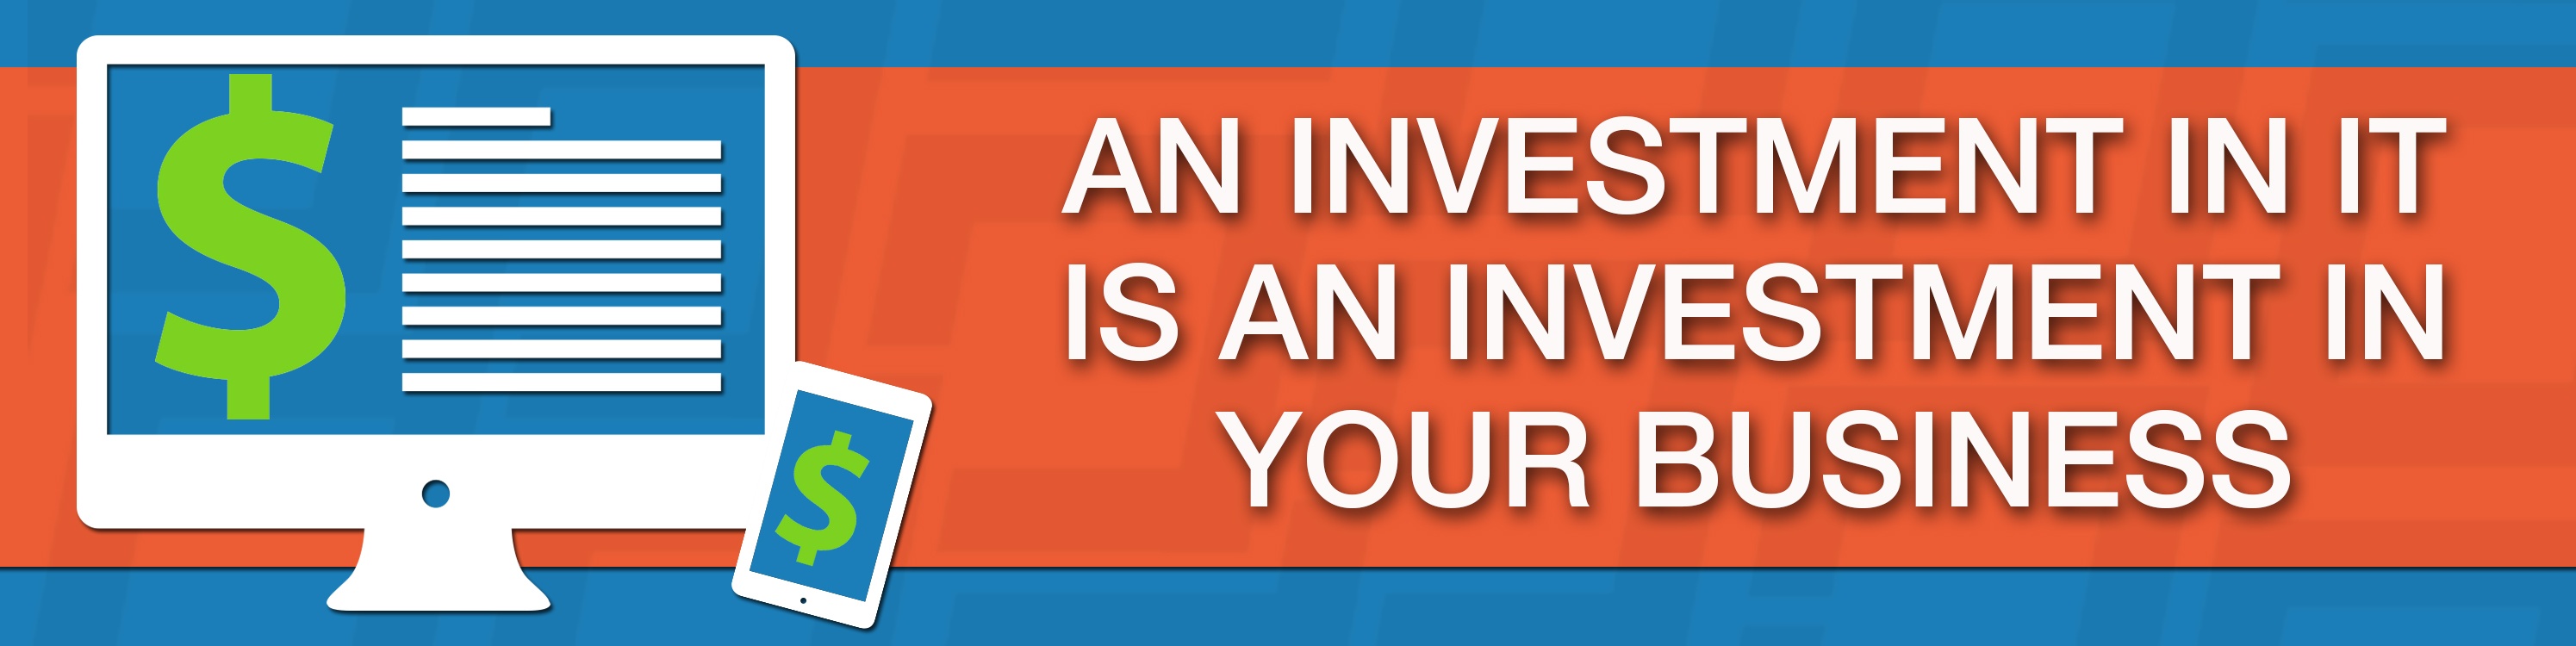 An Investment in IT is an Investment in Your Business